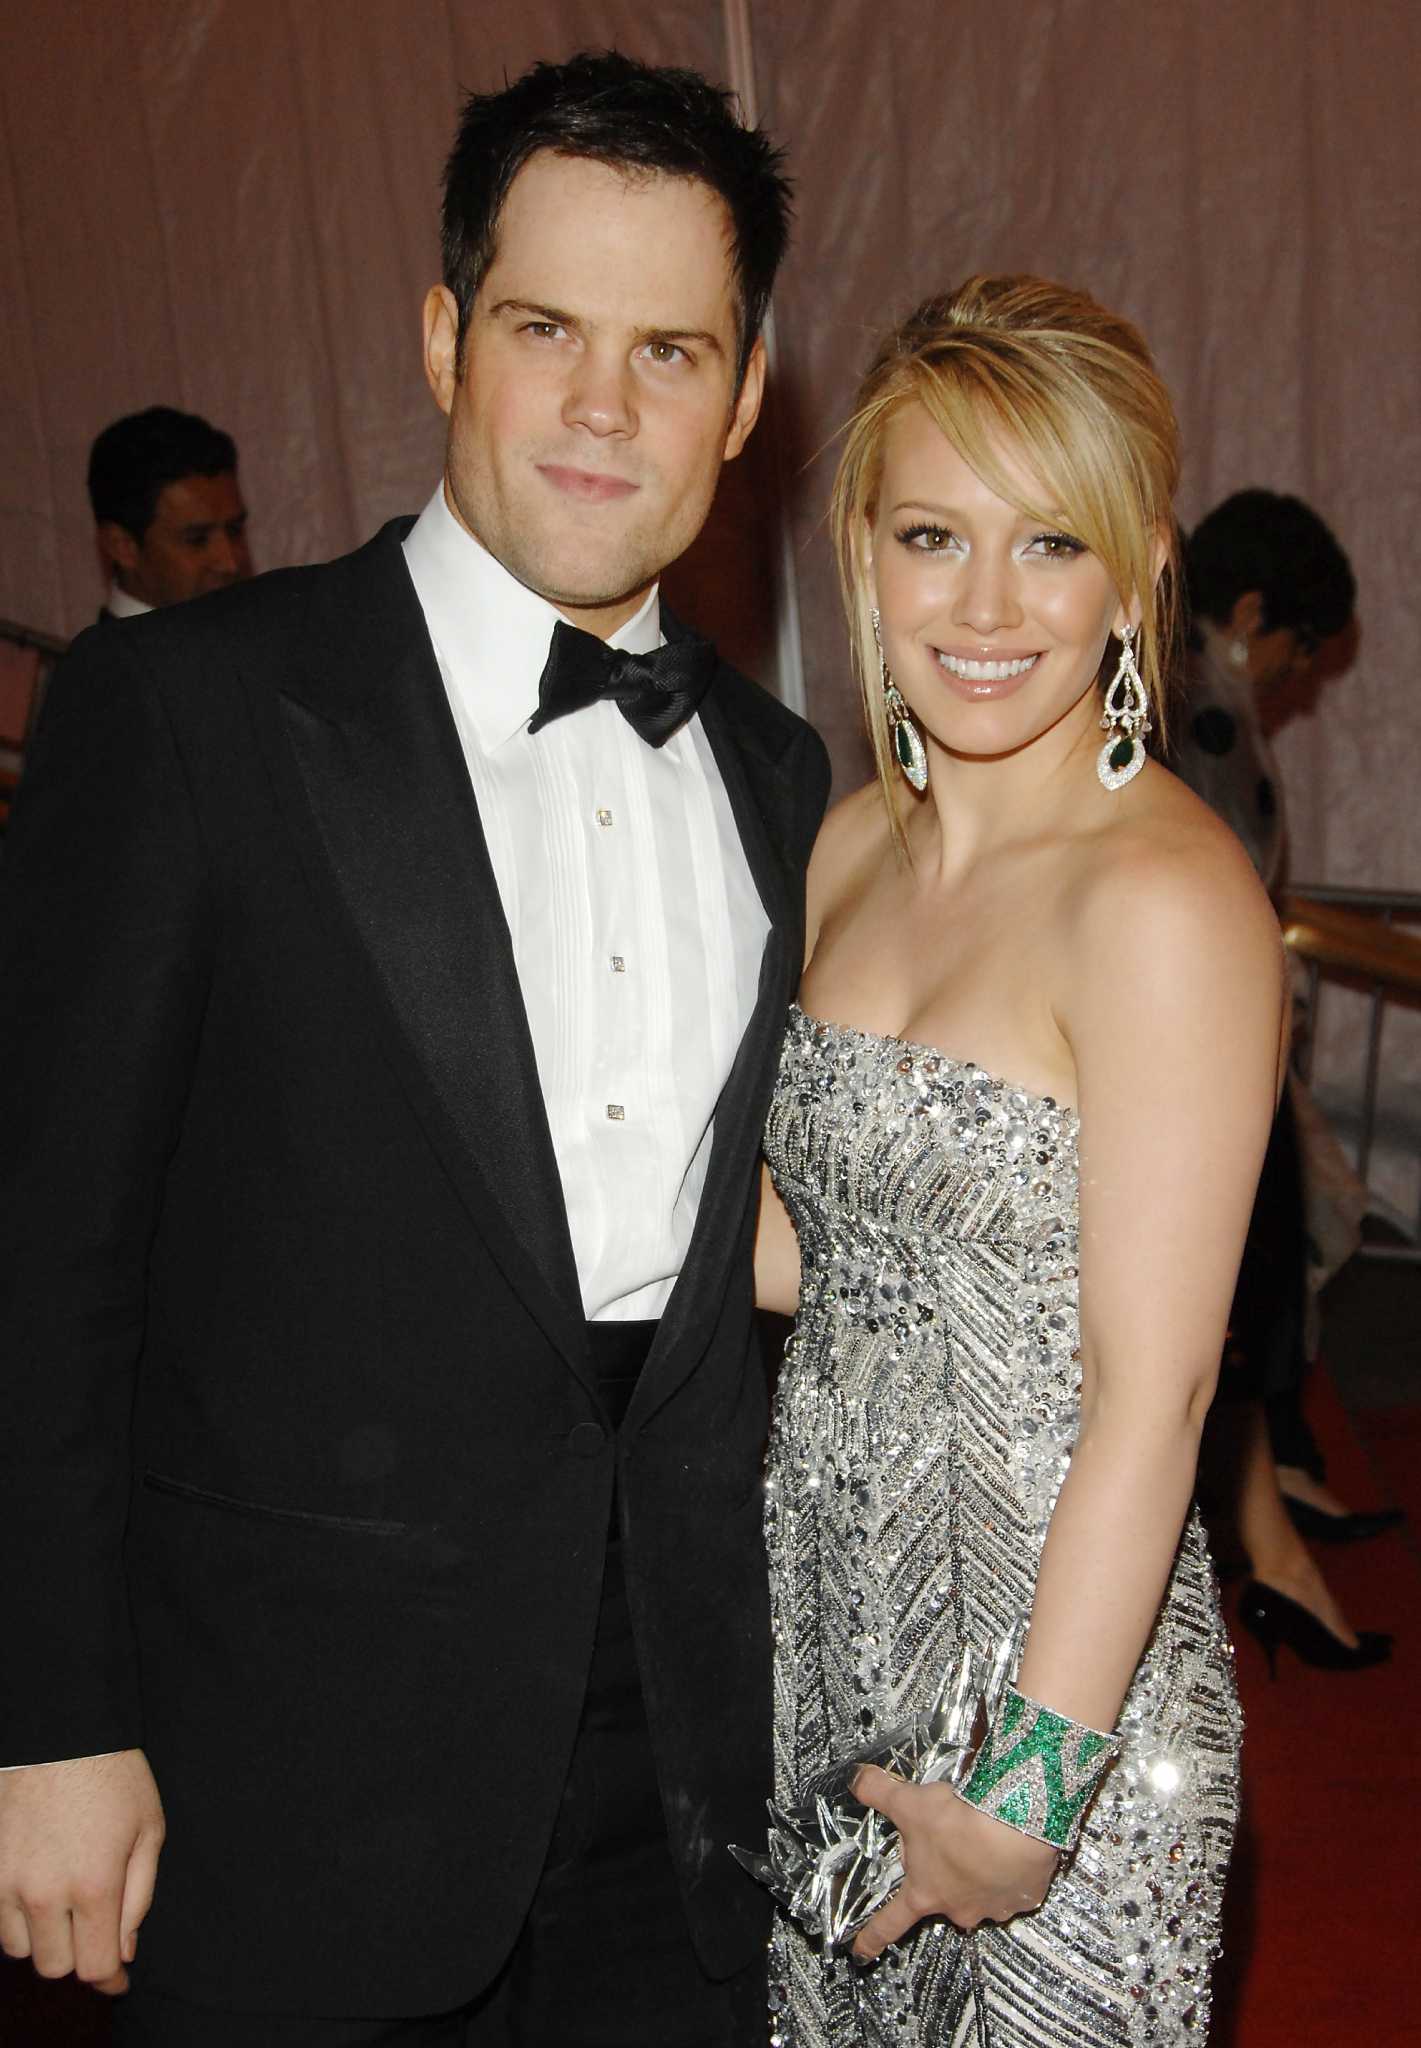 Hilary Duff's ex-husband, Mike Comrie under investigation for rape - Houston Chronicle